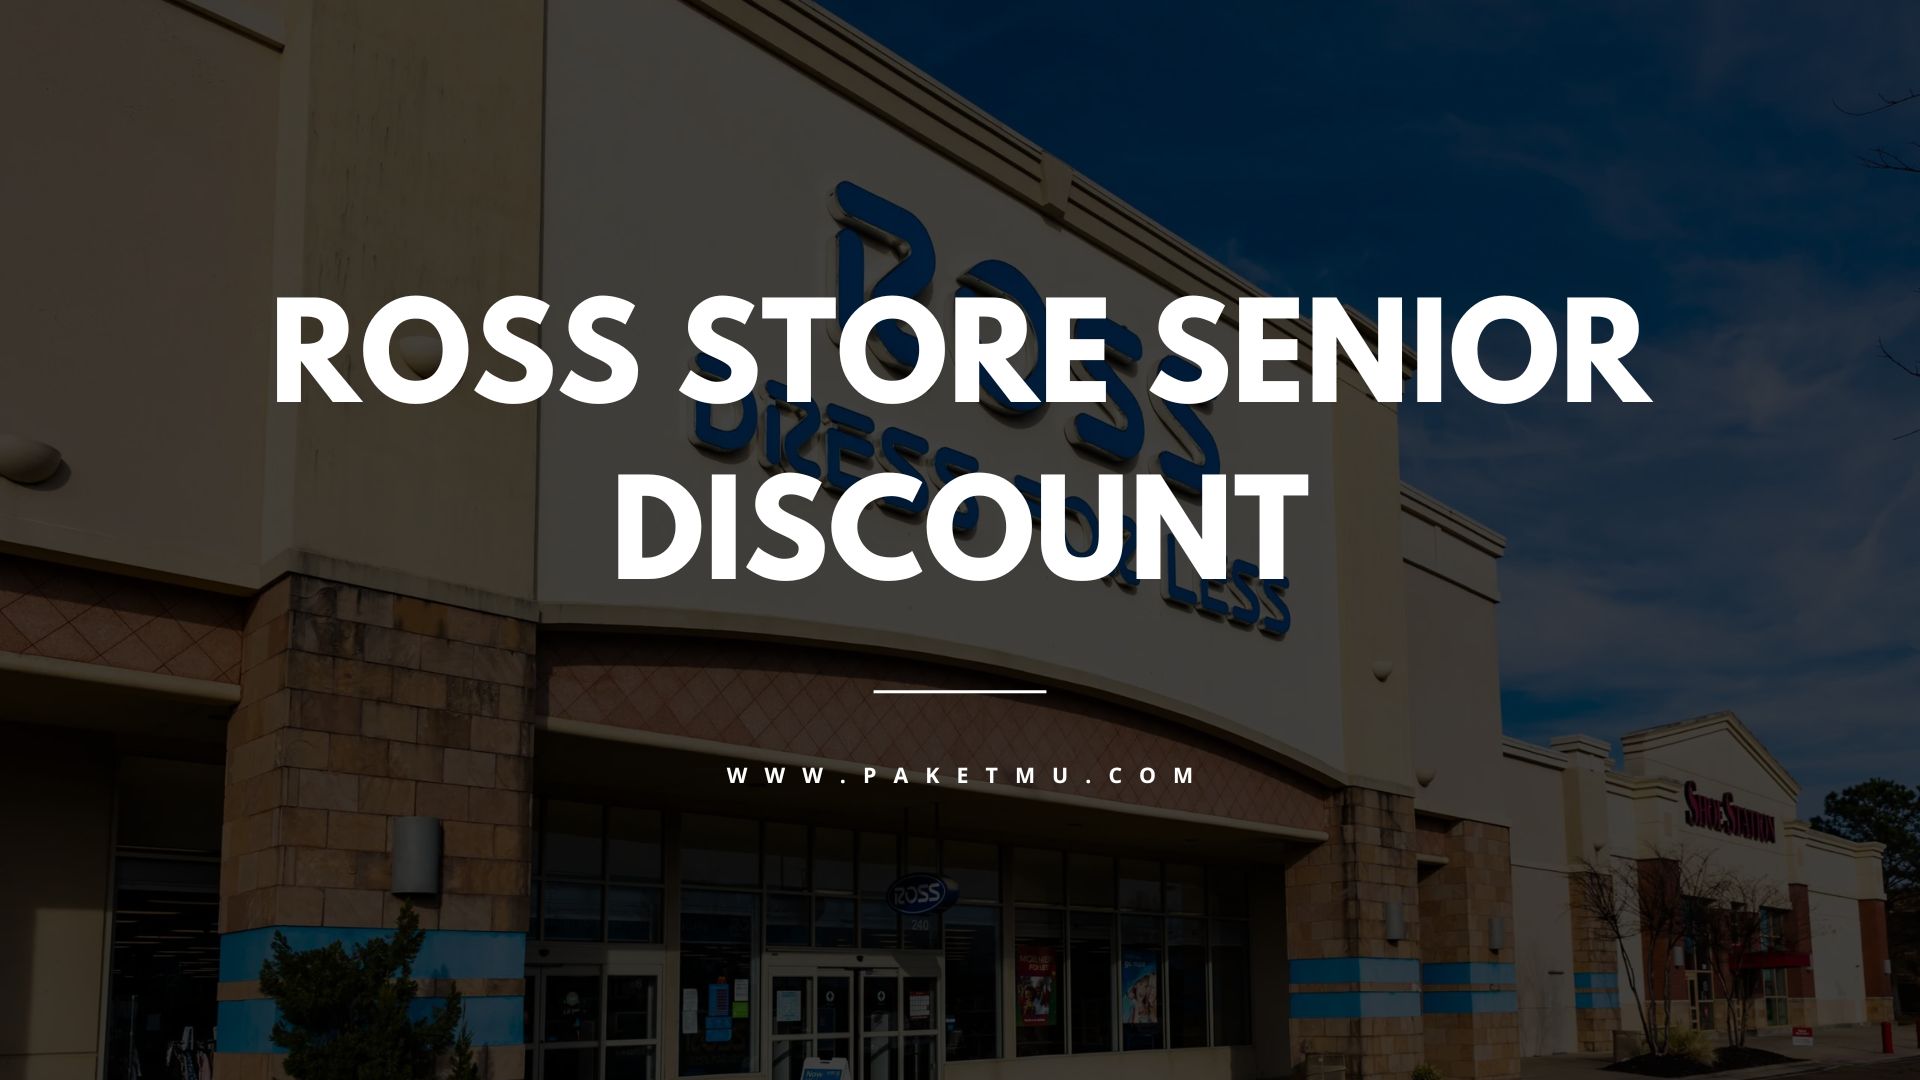 Ross Senior Discount Everything You Need to Know Paketmu Business Review